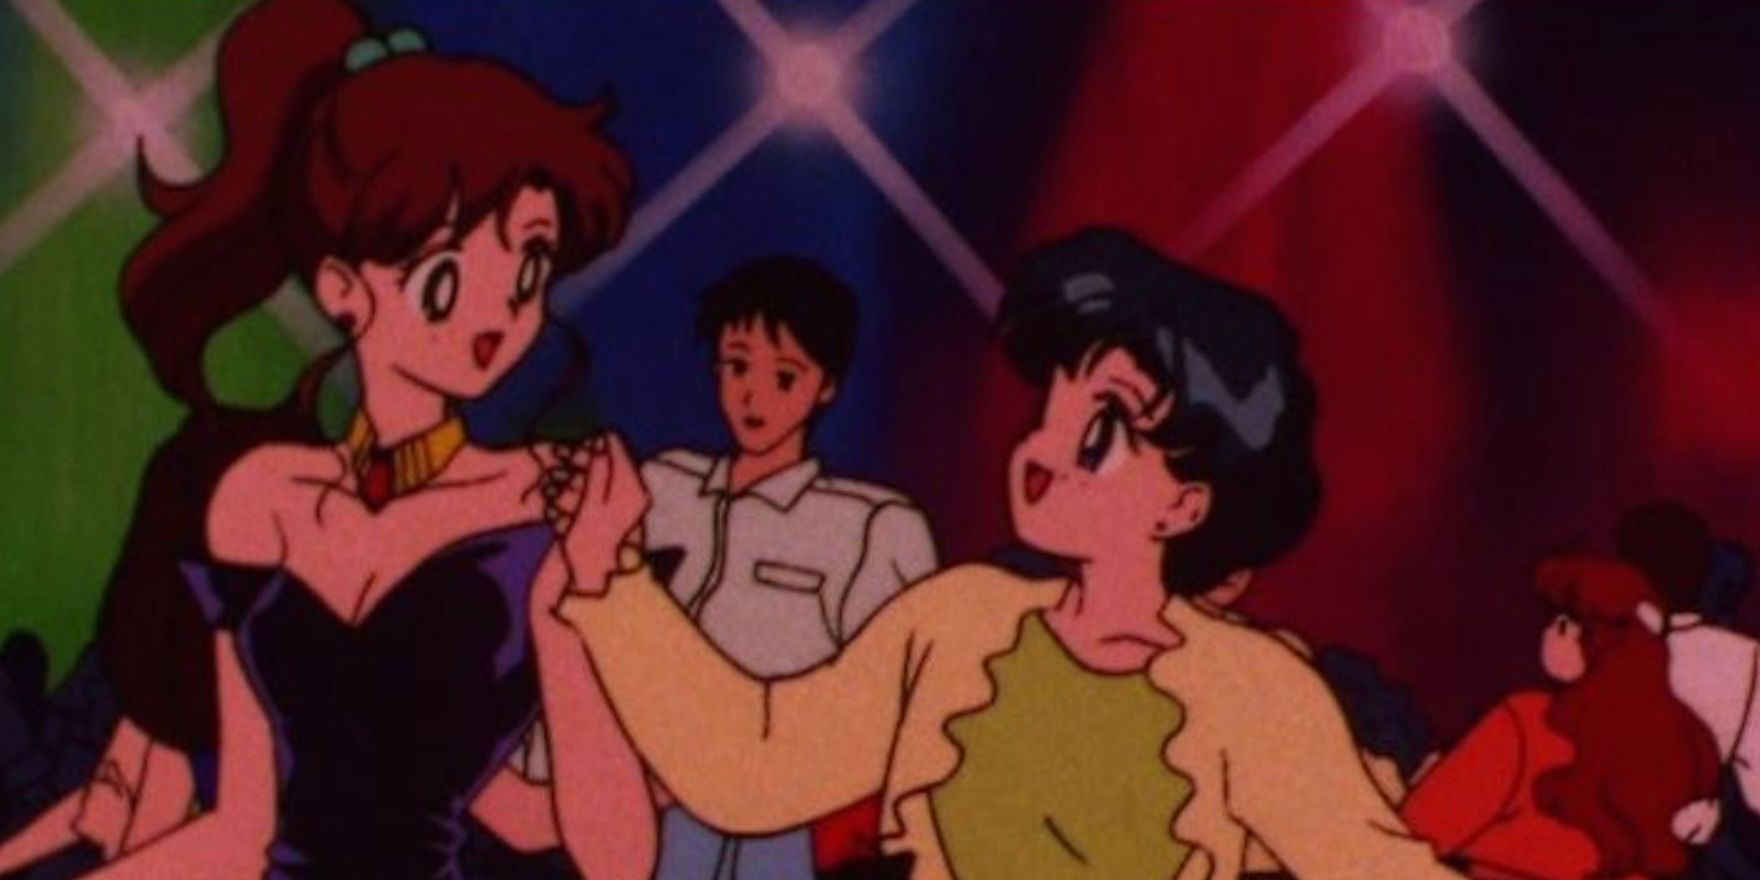 Makoto and Ami dancing in 90s Sailor Moon anime